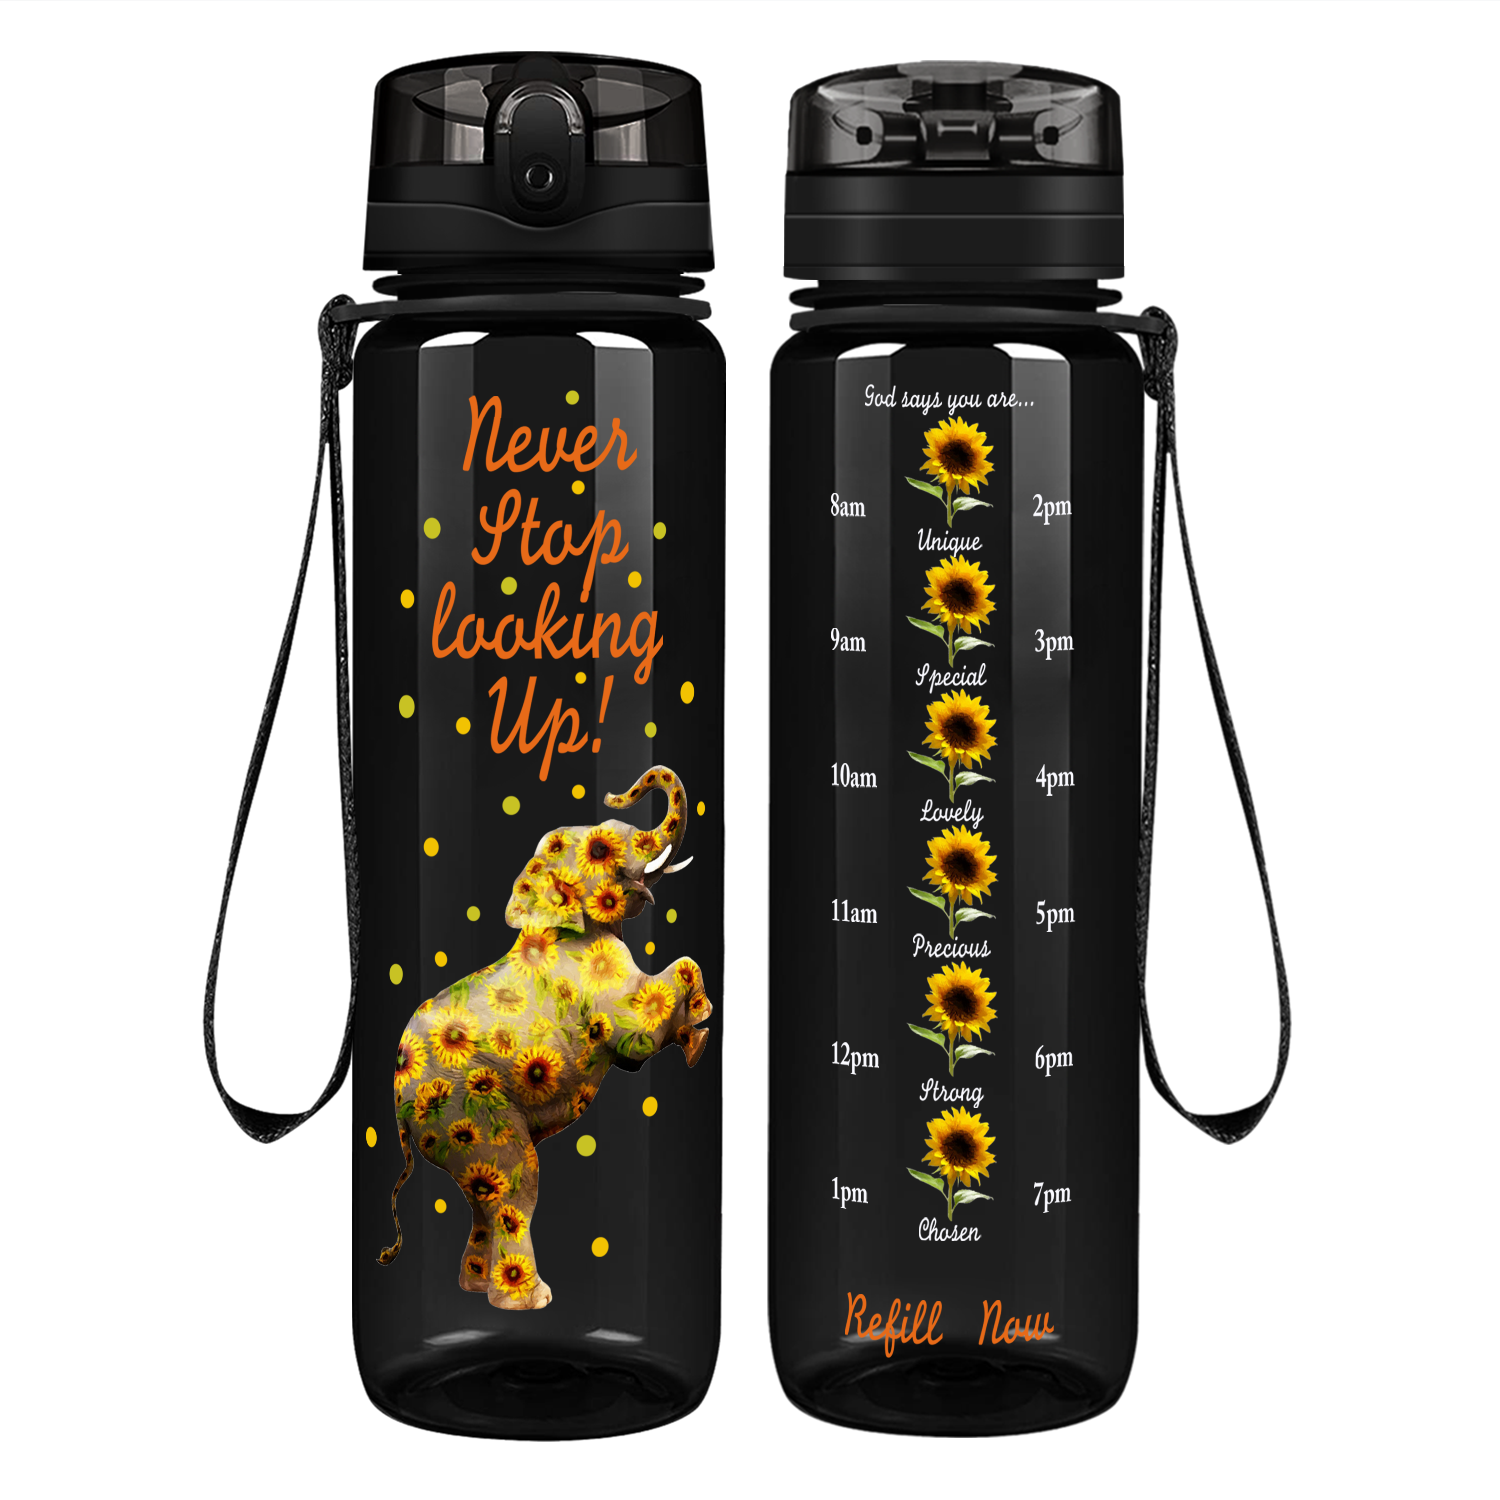 Never Stop Looking Up on 32 oz Motivational Tracking Water Bottle